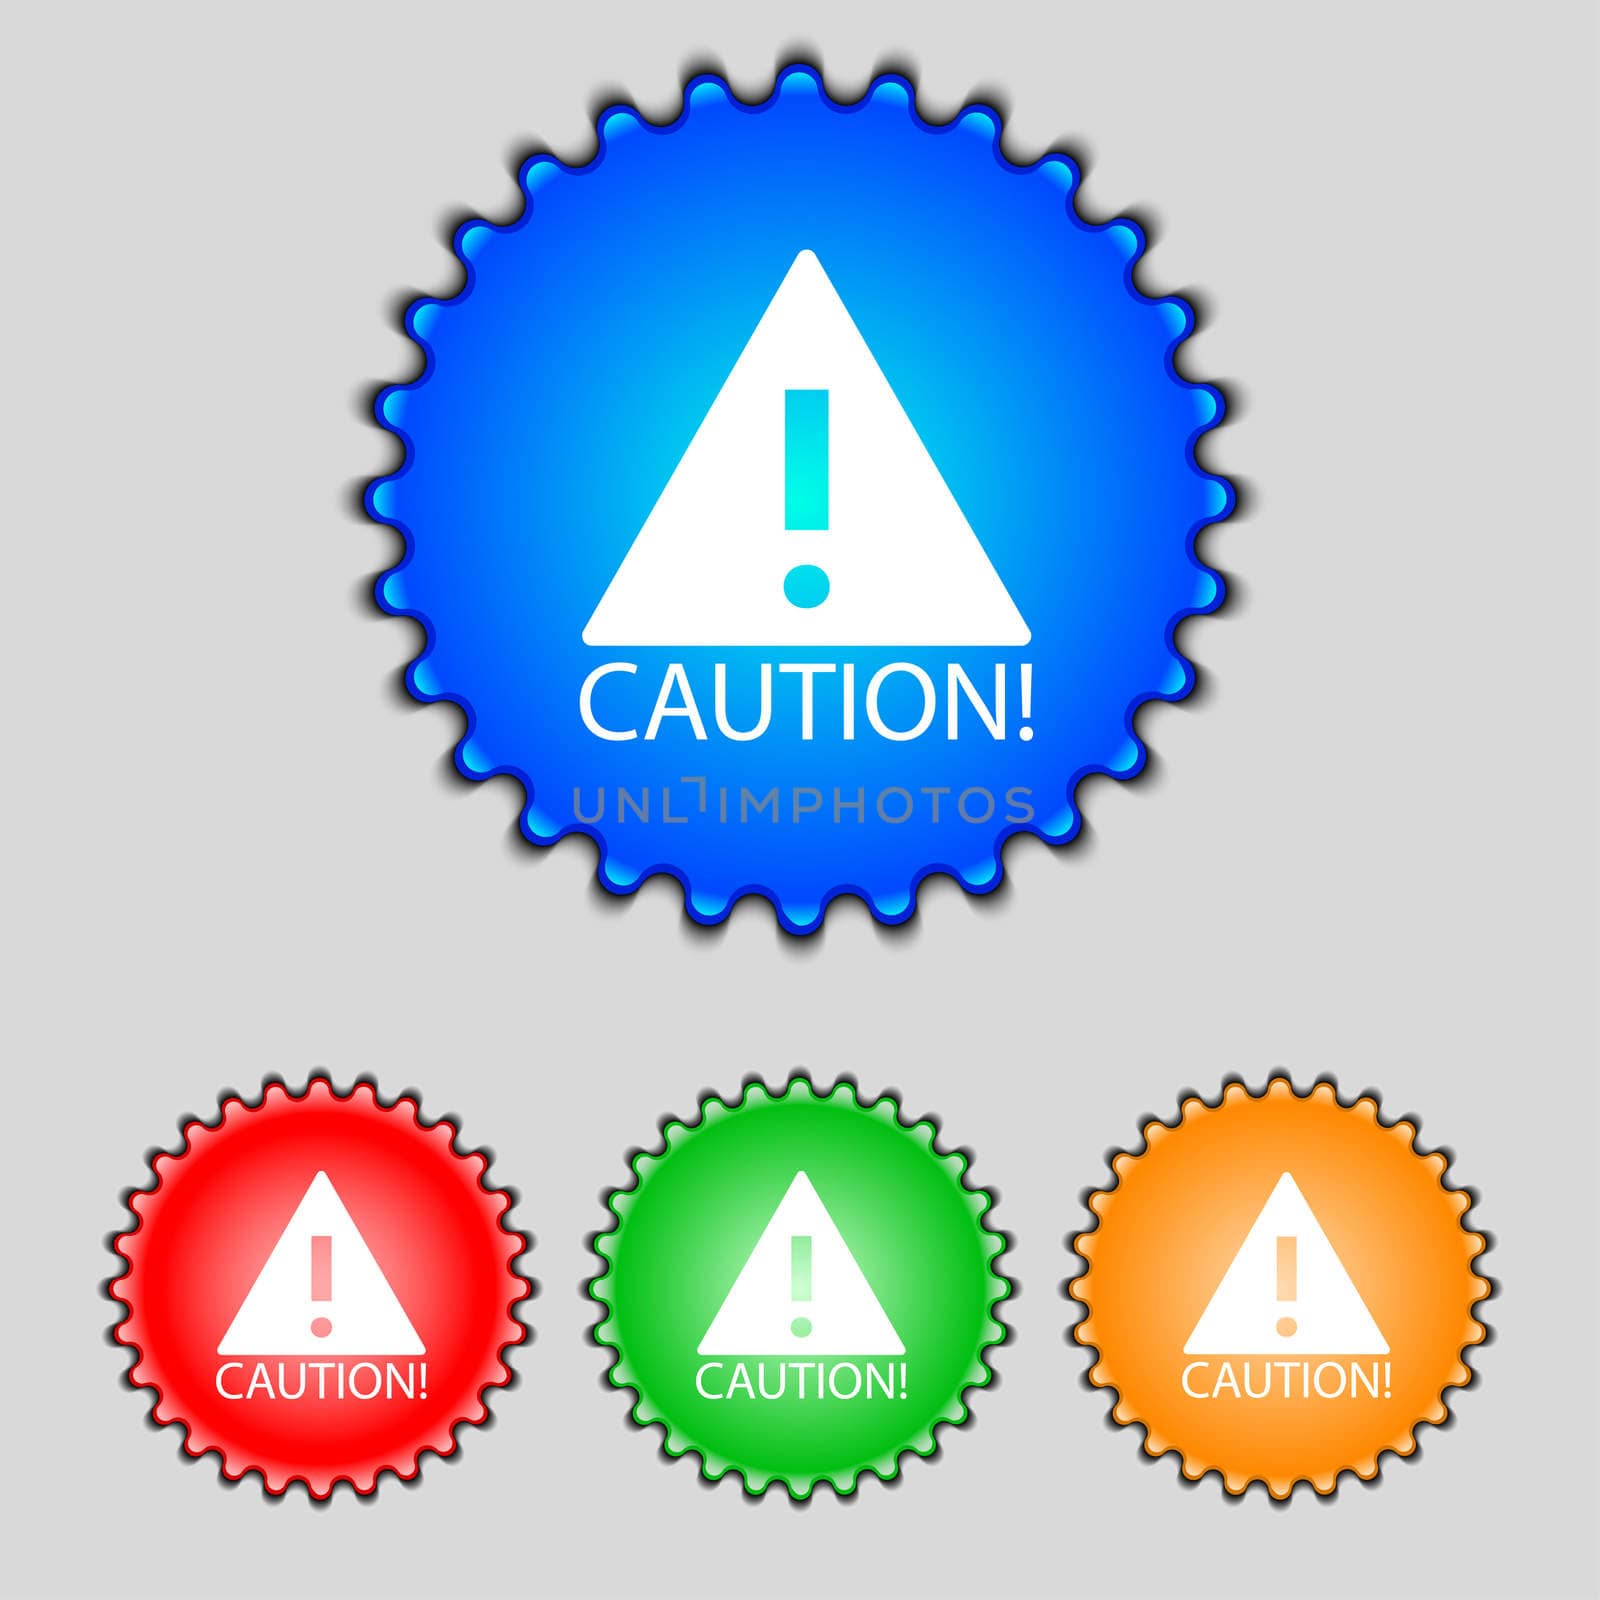 Attention caution sign icon. Exclamation mark. Hazard warning symbol. Set of colored buttons illustration